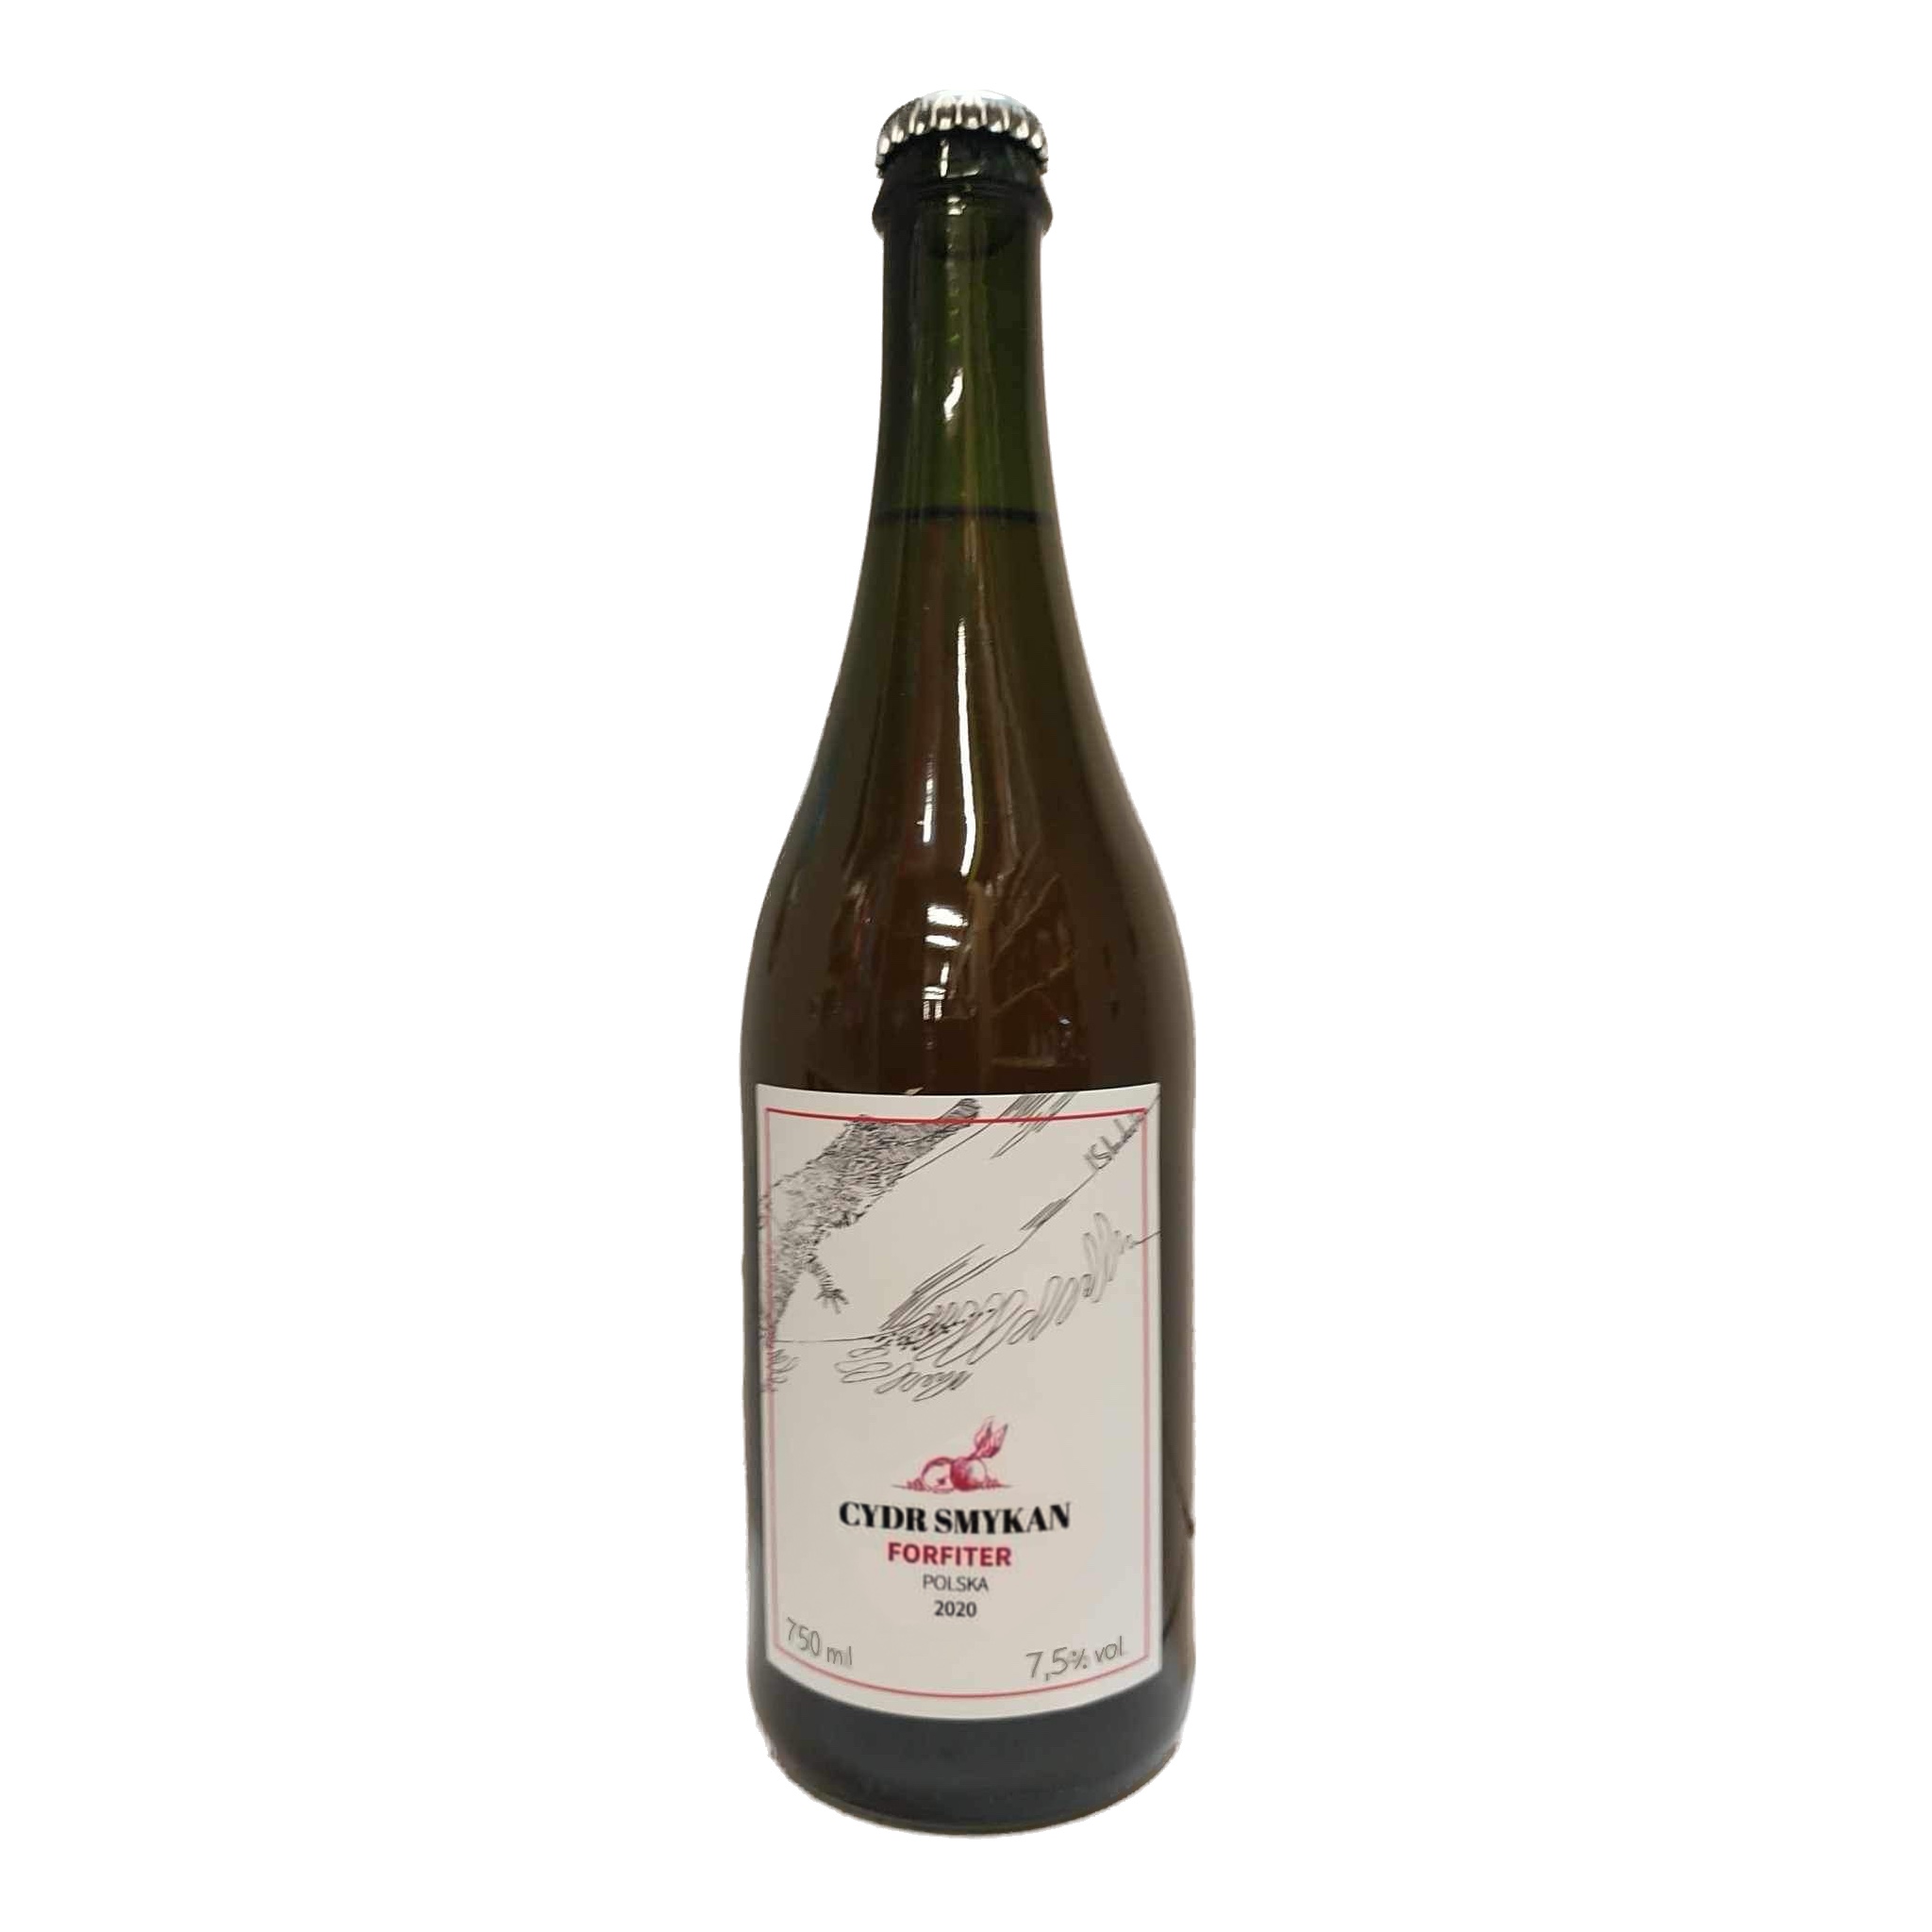 CIDER SMYKAN FORFITER With the addition of red gooseberries